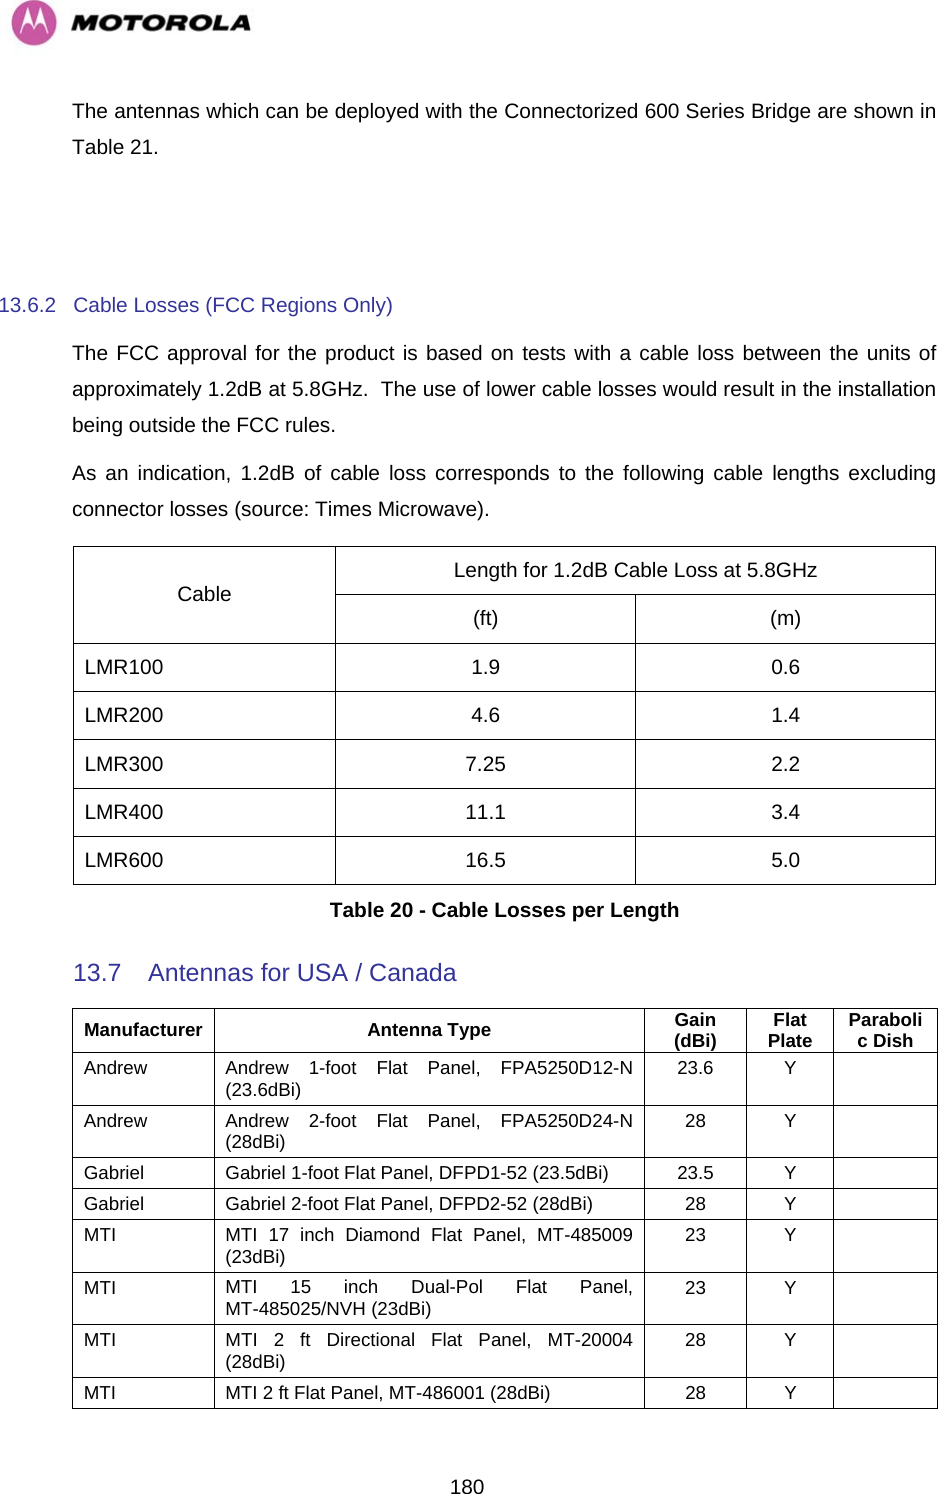   180The antennas which can be deployed with the Connectorized 600 Series Bridge are shown in Table 21.   13.6.2  Cable Losses (FCC Regions Only) The FCC approval for the product is based on tests with a cable loss between the units of approximately 1.2dB at 5.8GHz.  The use of lower cable losses would result in the installation being outside the FCC rules. As an indication, 1.2dB of cable loss corresponds to the following cable lengths excluding connector losses (source: Times Microwave). Length for 1.2dB Cable Loss at 5.8GHz Cable  (ft) (m) LMR100 1.9 0.6 LMR200 4.6 1.4 LMR300 7.25 2.2 LMR400 11.1 3.4 LMR600 16.5 5.0 Table 20 - Cable Losses per Length 13.7  Antennas for USA / Canada Manufacturer Antenna Type  Gain (dBi)  Flat Plate  Parabolic Dish Andrew  Andrew 1-foot Flat Panel, FPA5250D12-N (23.6dBi)  23.6 Y   Andrew  Andrew 2-foot Flat Panel, FPA5250D24-N (28dBi)  28 Y   Gabriel  Gabriel 1-foot Flat Panel, DFPD1-52 (23.5dBi)  23.5  Y   Gabriel Gabriel 2-foot Flat Panel, DFPD2-52 (28dBi)  28  Y   MTI  MTI 17 inch Diamond Flat Panel, MT-485009 (23dBi)  23 Y   MTI  MTI 15 inch Dual-Pol Flat Panel, MT-485025/NVH (23dBi)  23 Y   MTI  MTI 2 ft Directional Flat Panel, MT-20004 (28dBi)  28 Y   MTI  MTI 2 ft Flat Panel, MT-486001 (28dBi)  28  Y   